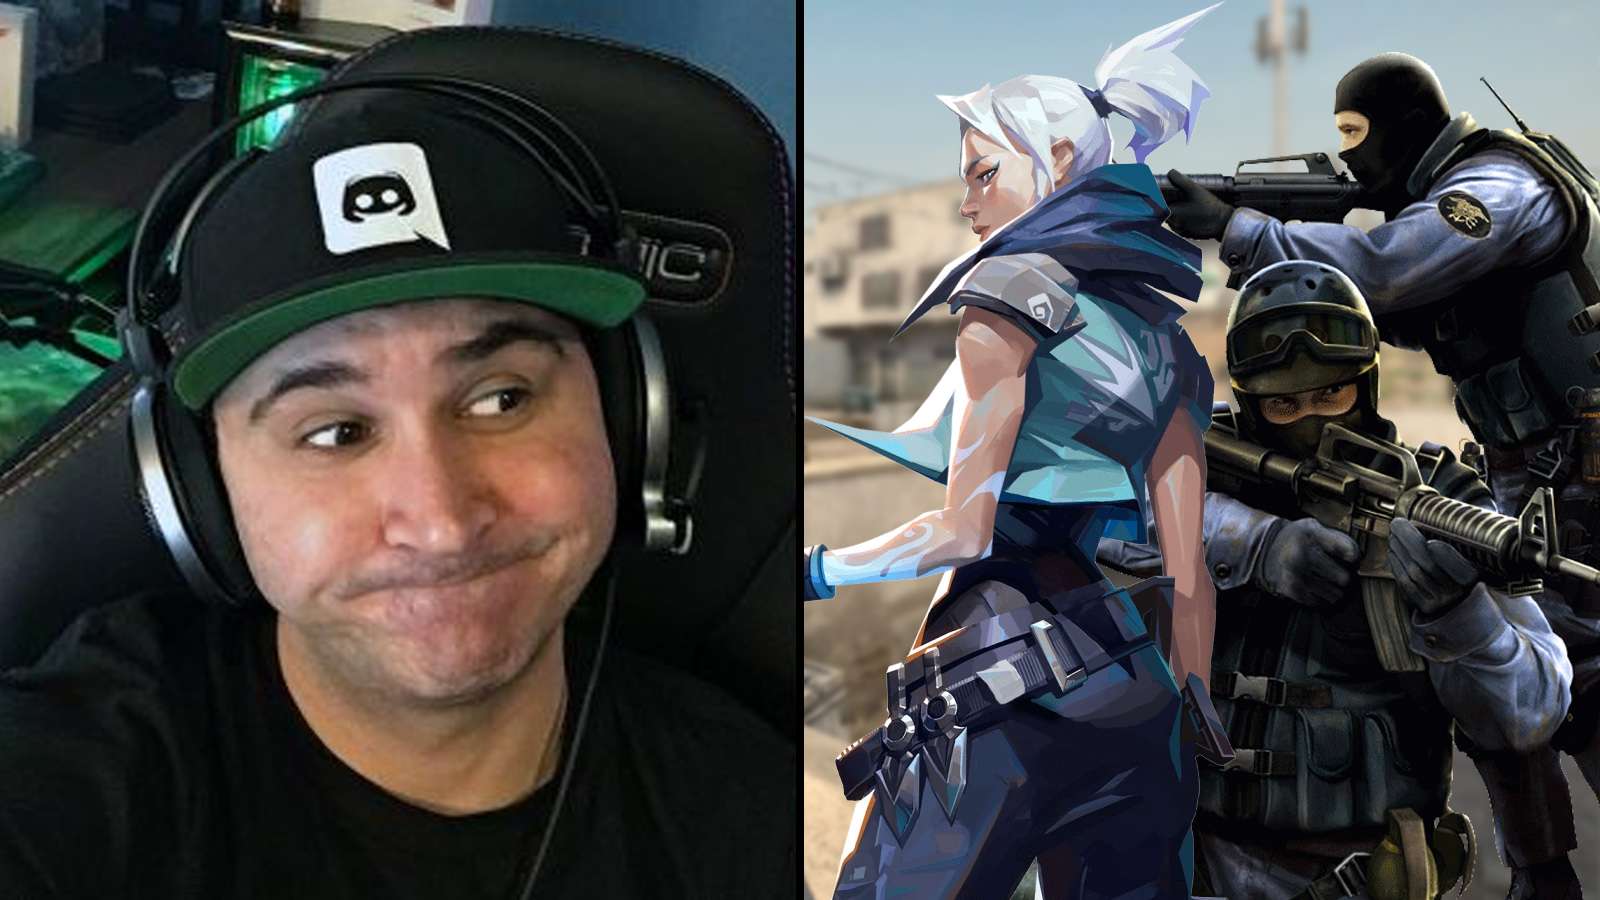 Summit1g claims CS:GO has been "ruined" on Twitch amid Valorant hype